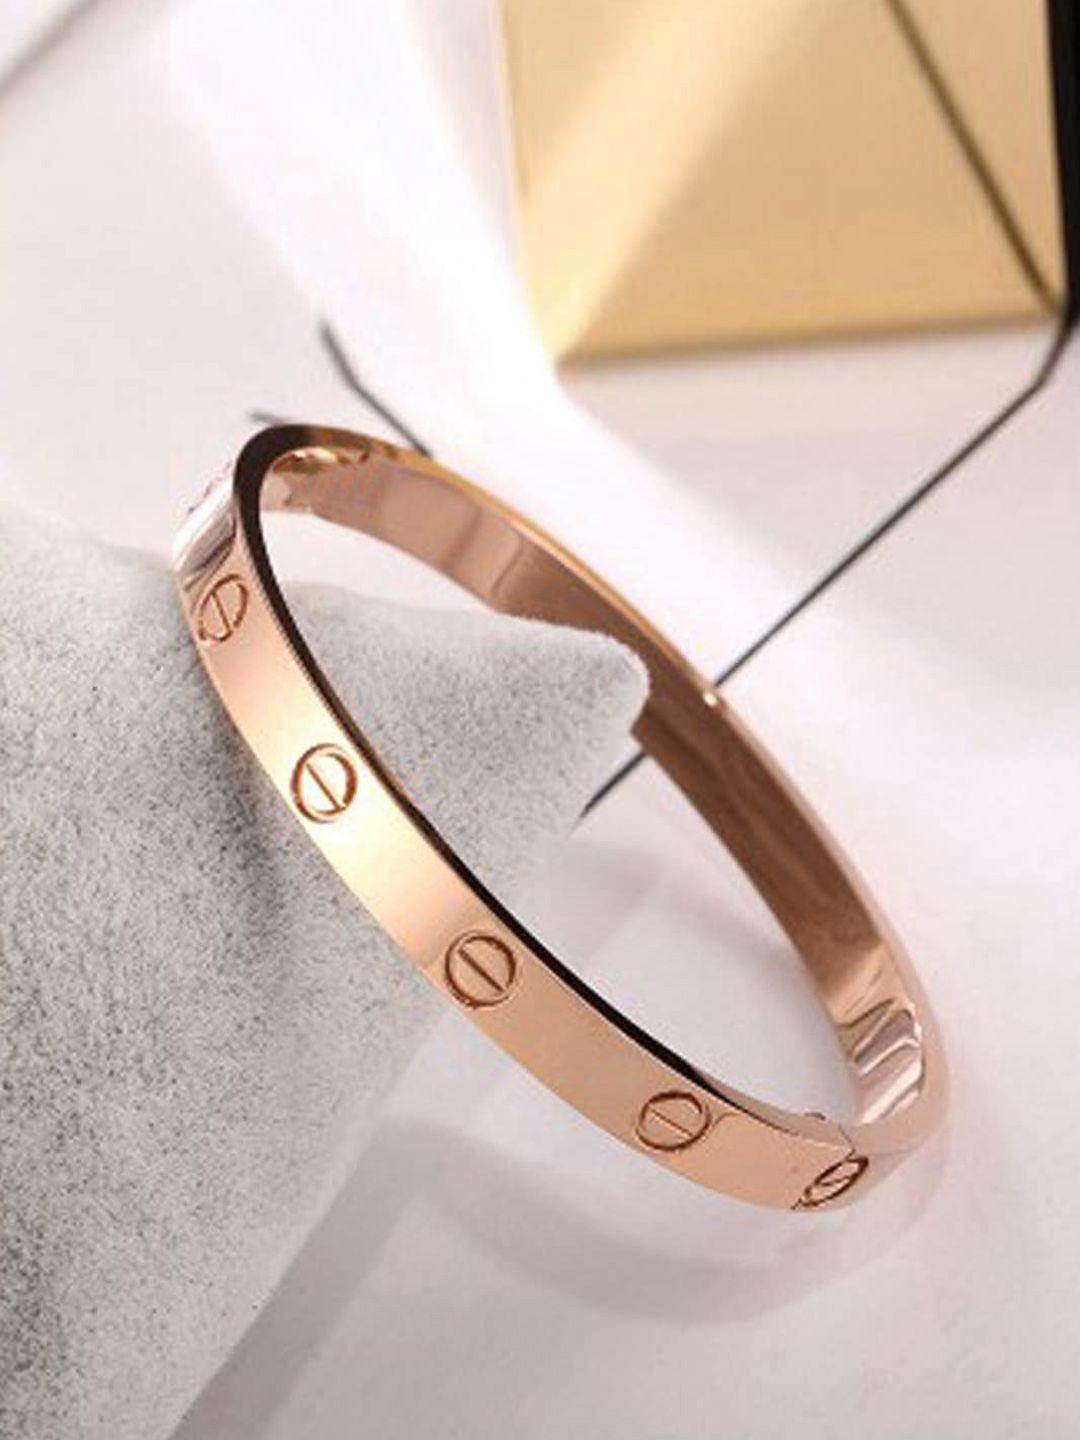 designs by jewels galaxy women rose gold rose bangle-style bracelet